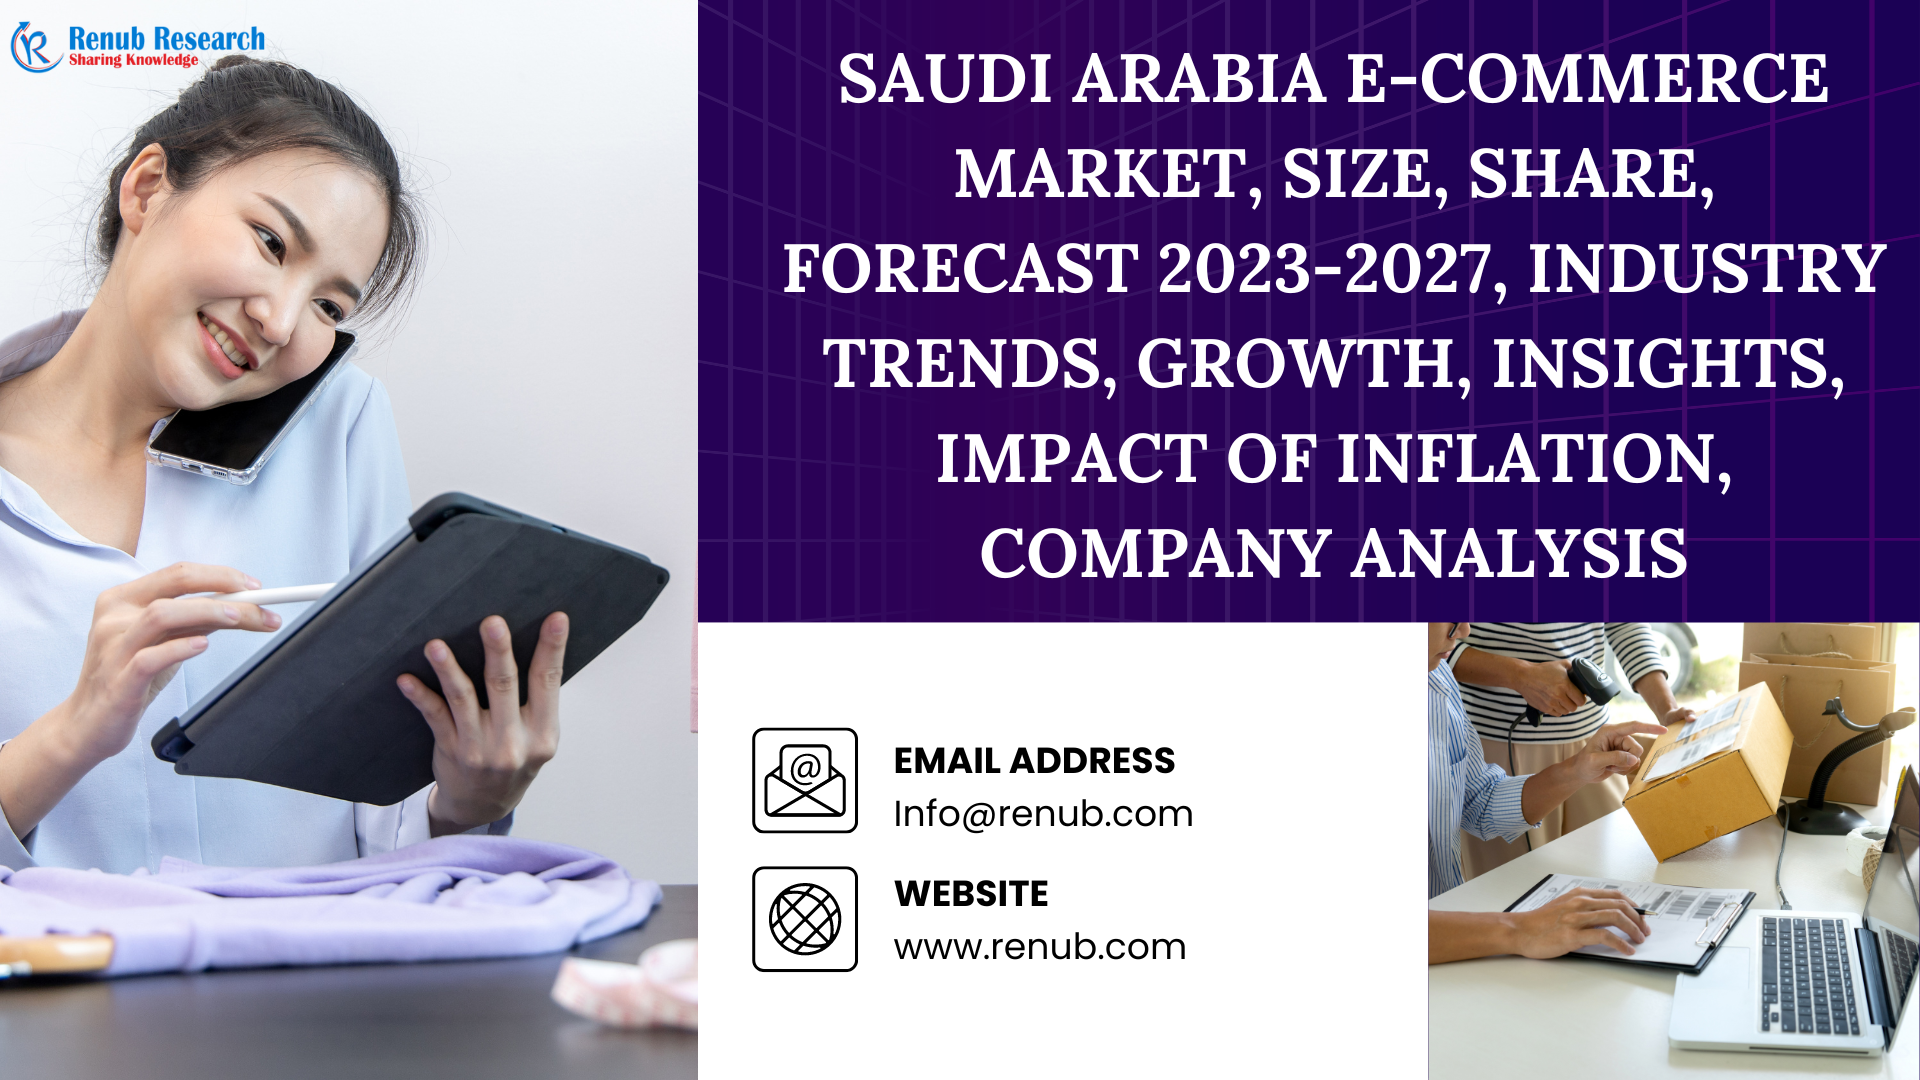 Saudi Arabia E-Commerce Market is expected to reach US$ 20.01 Billion in 2027